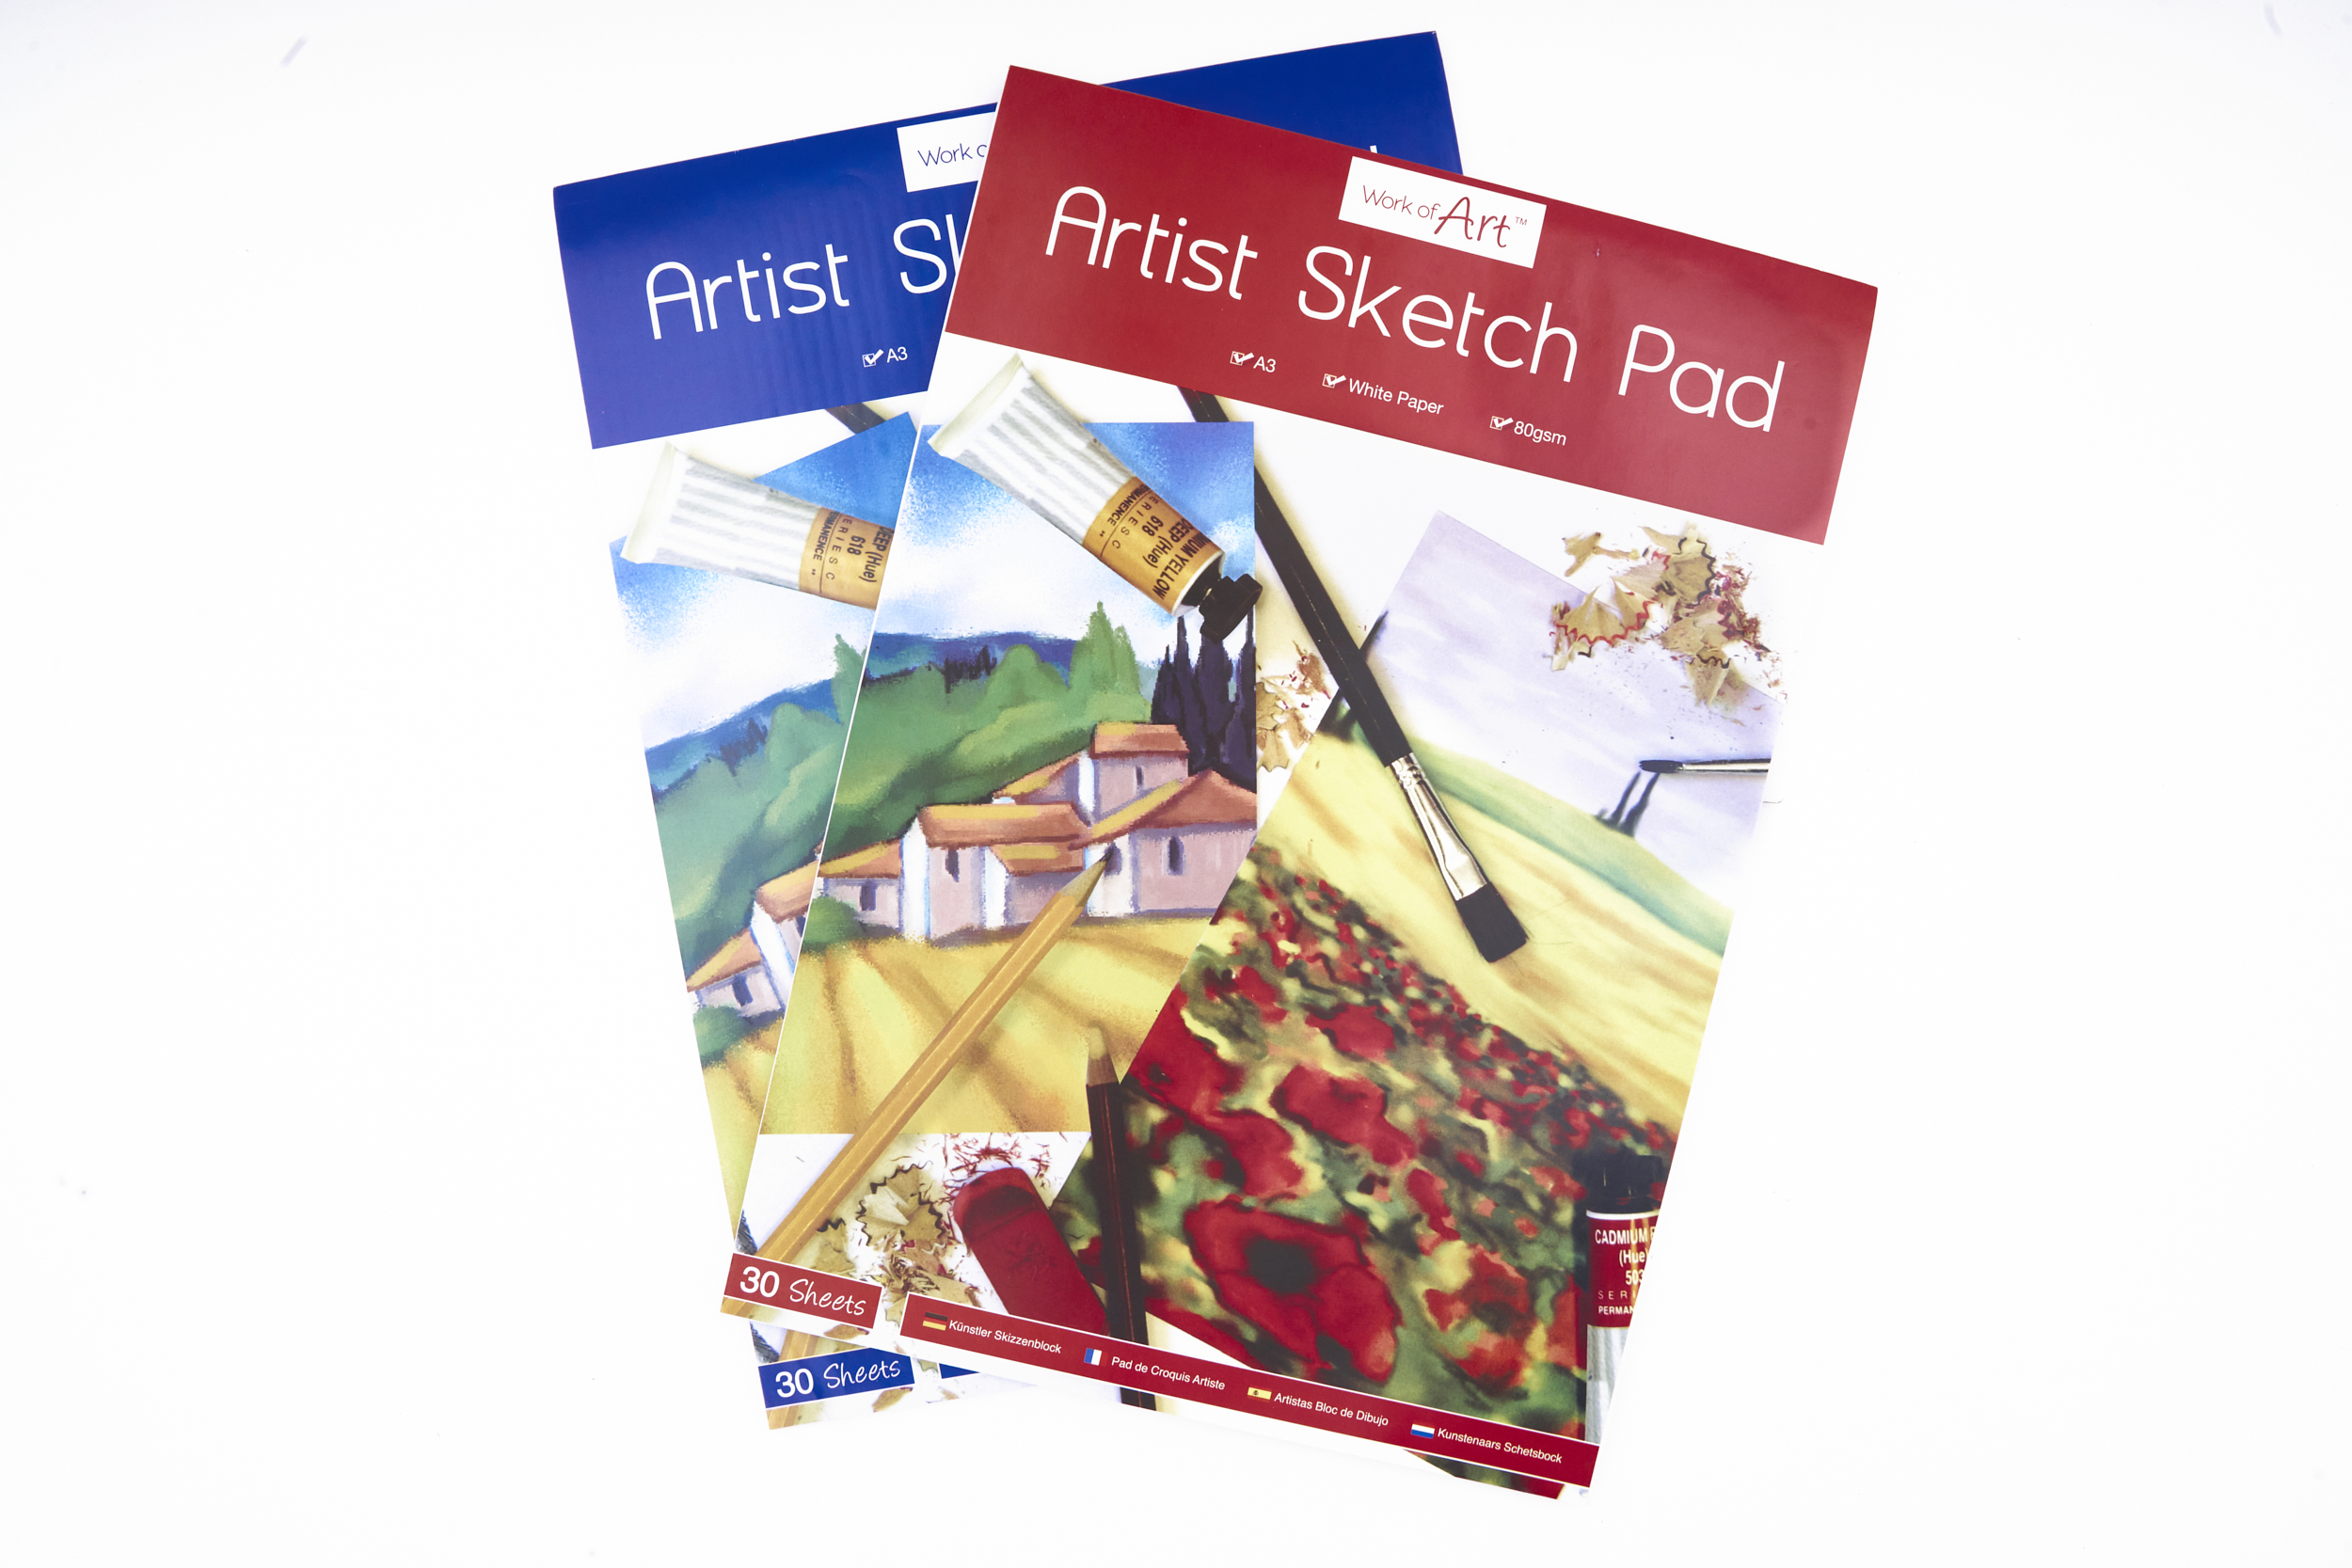 Sketch Pads  Sketch Books From The Works